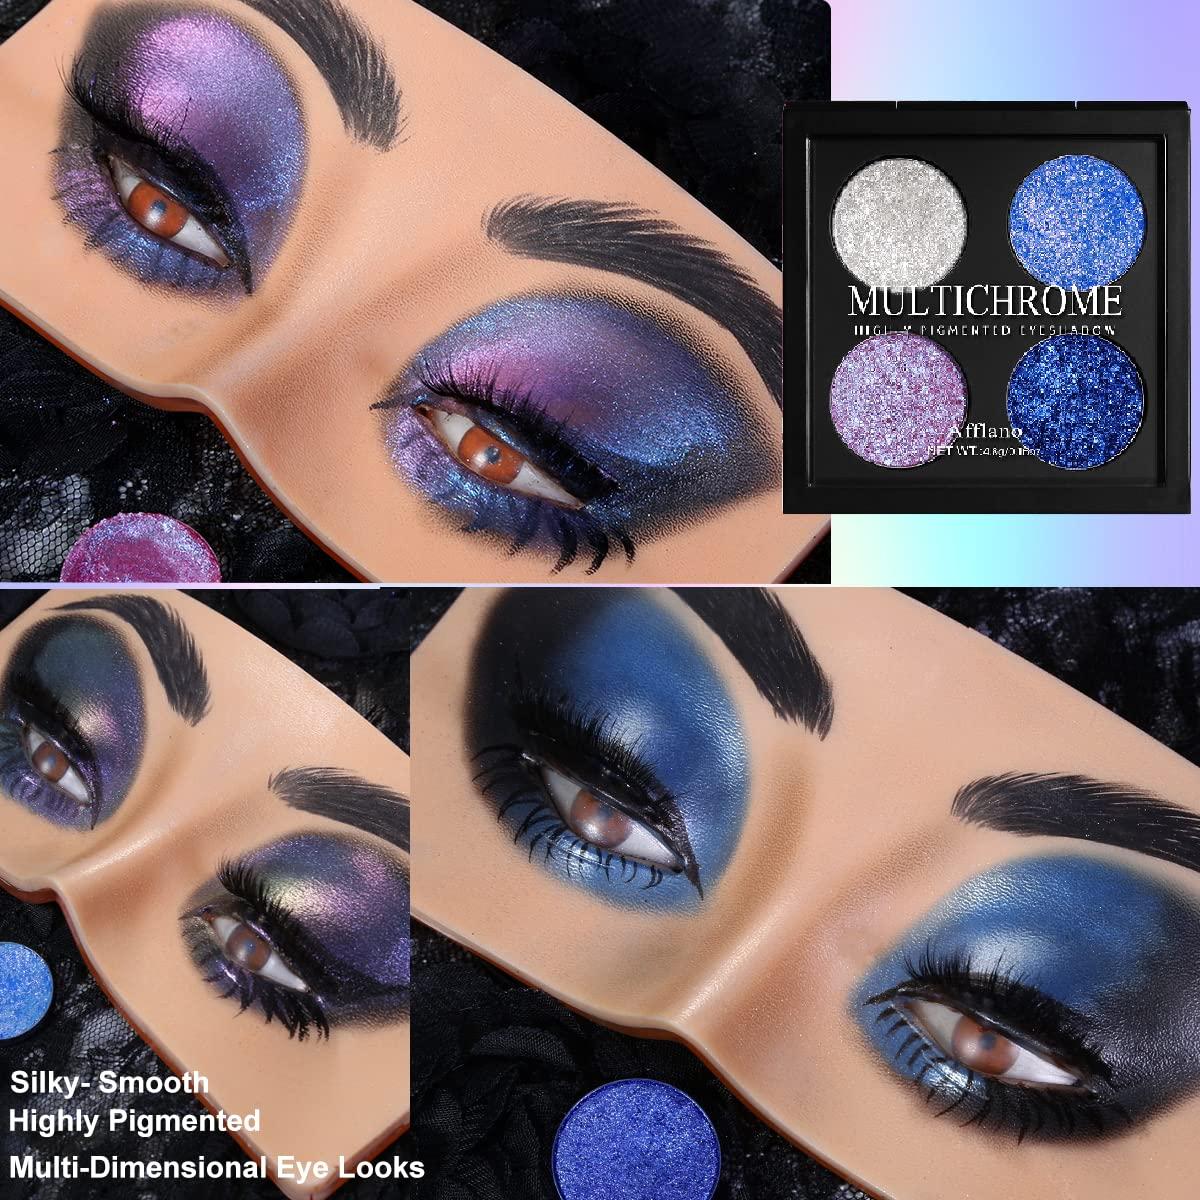 Afflano Purple Eyeshadow Palette Multichrome Eyeshadow Glitter Holographic  Makeup Set, Color Changing Minerals Chameleon Eyeshadow, Highly Pigmented